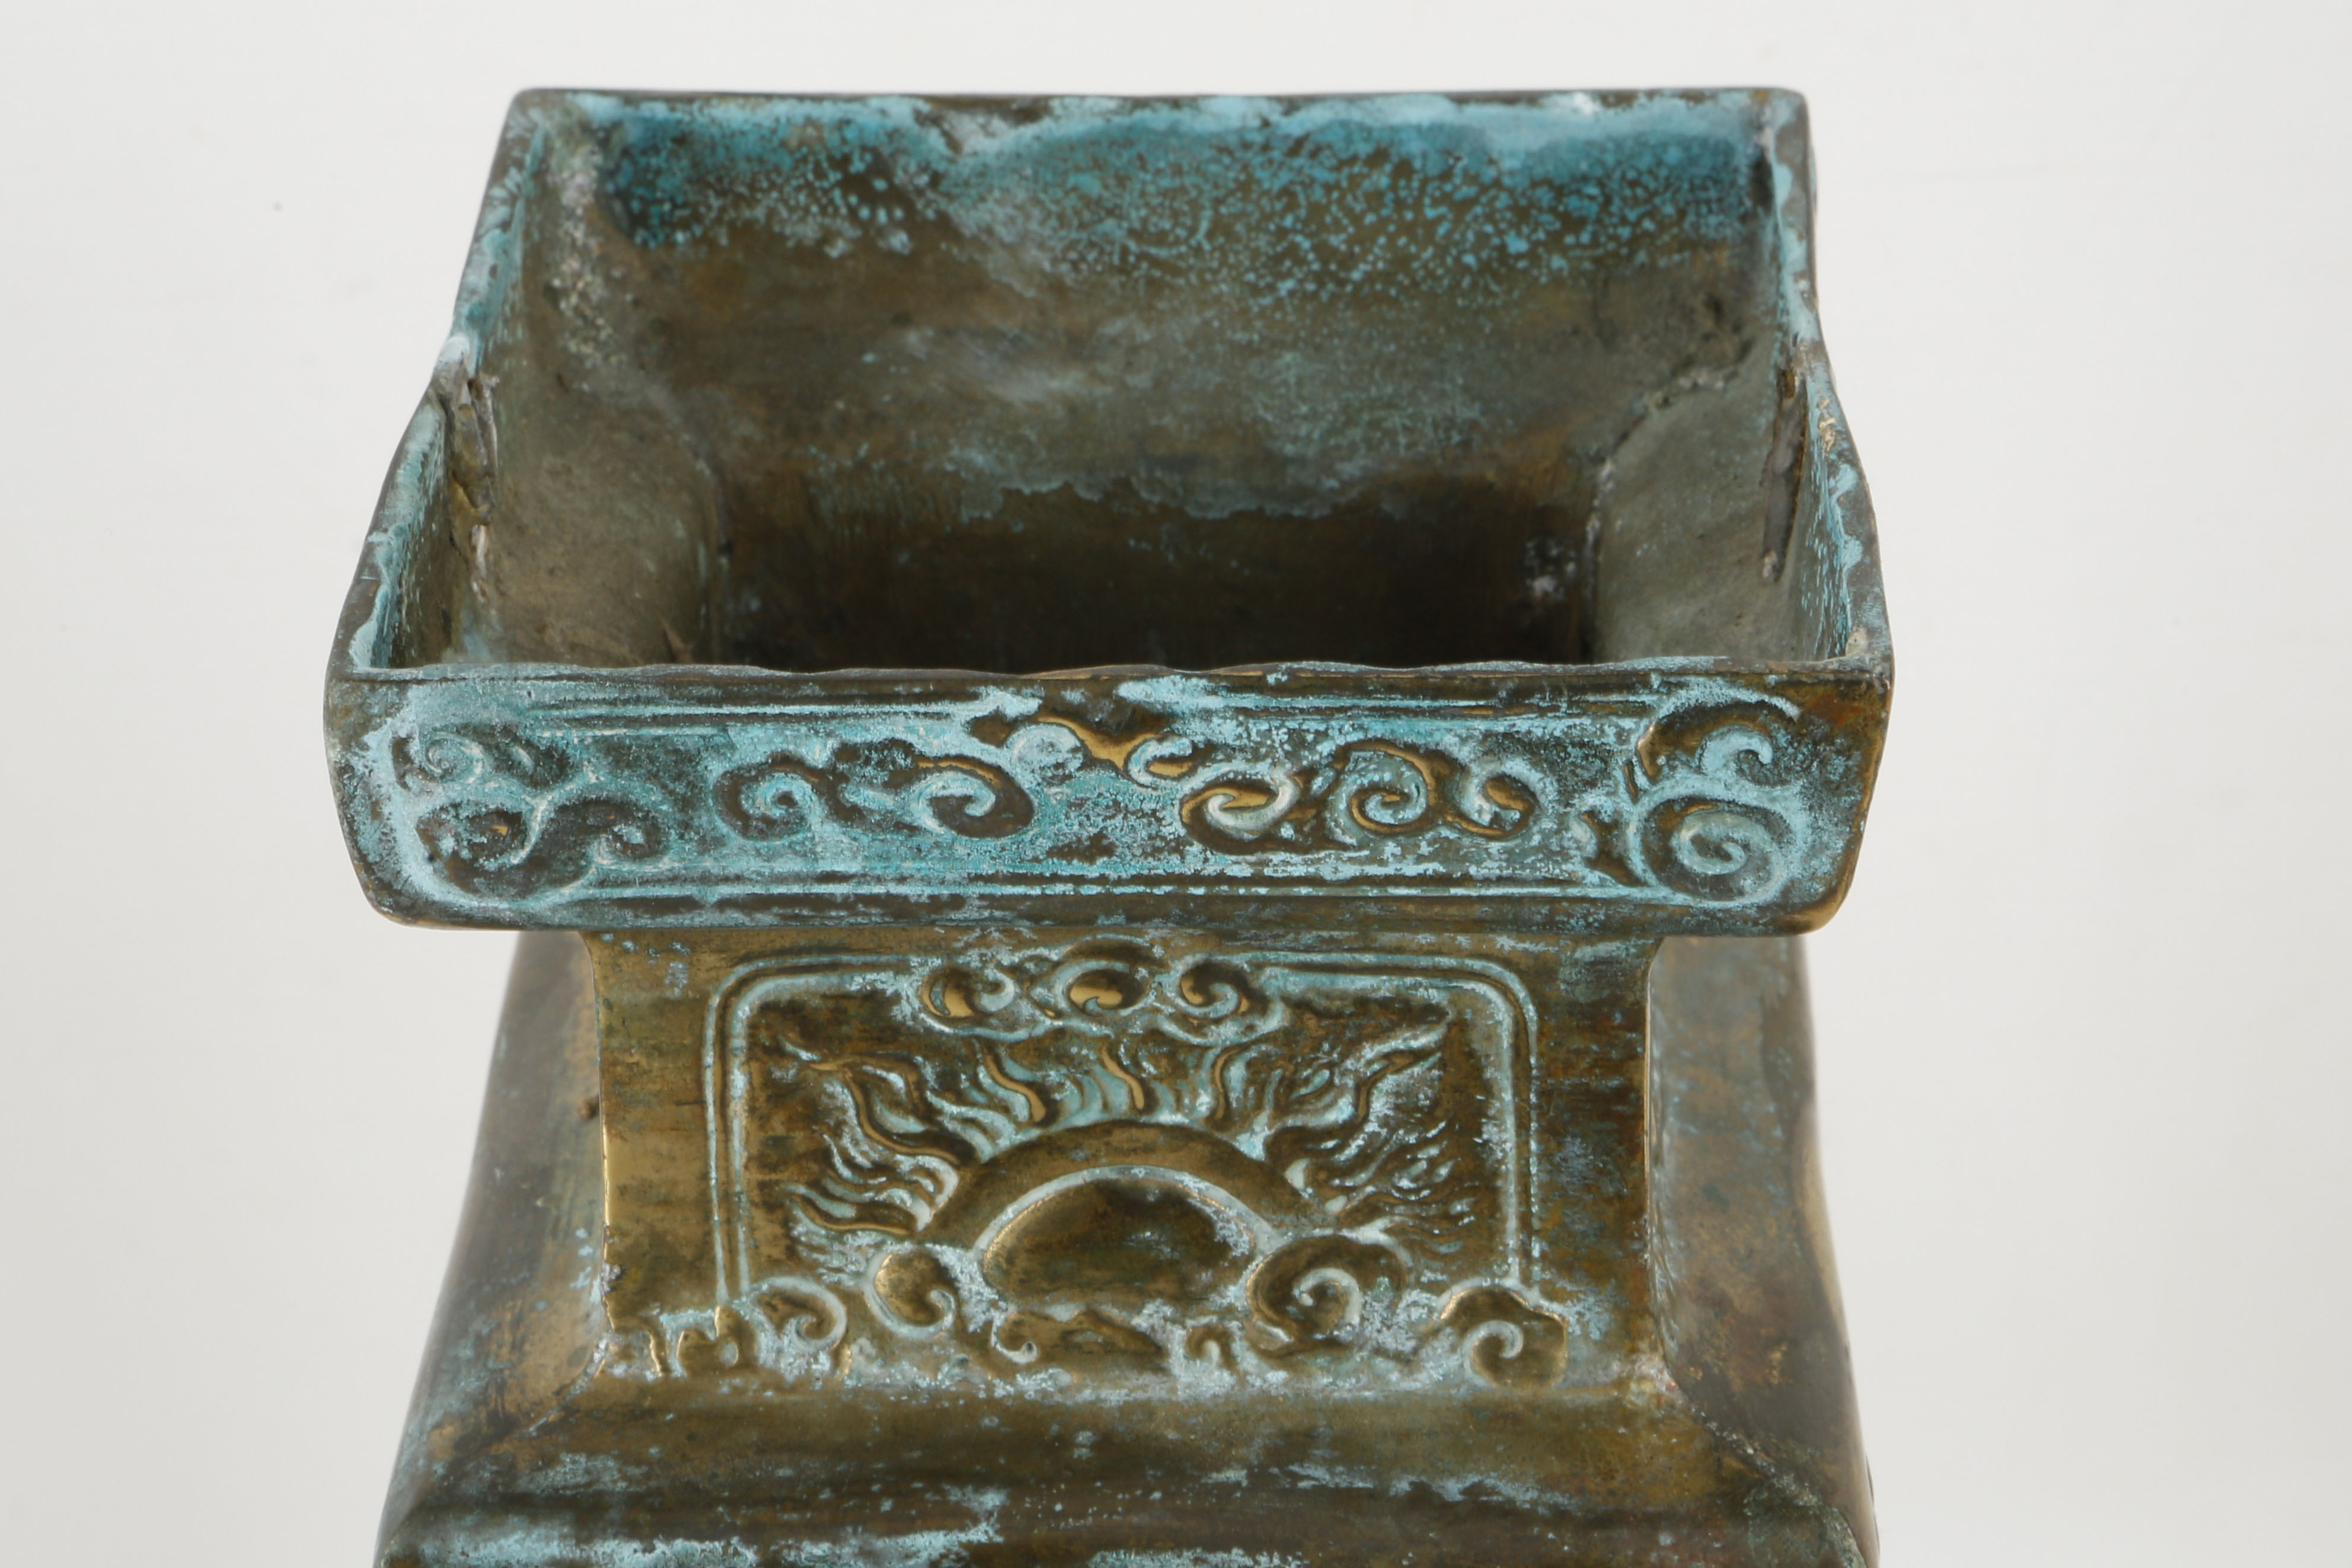 A Chinese copper alloy square section reticulated lantern, the sides decorated with vases filled - Image 3 of 4